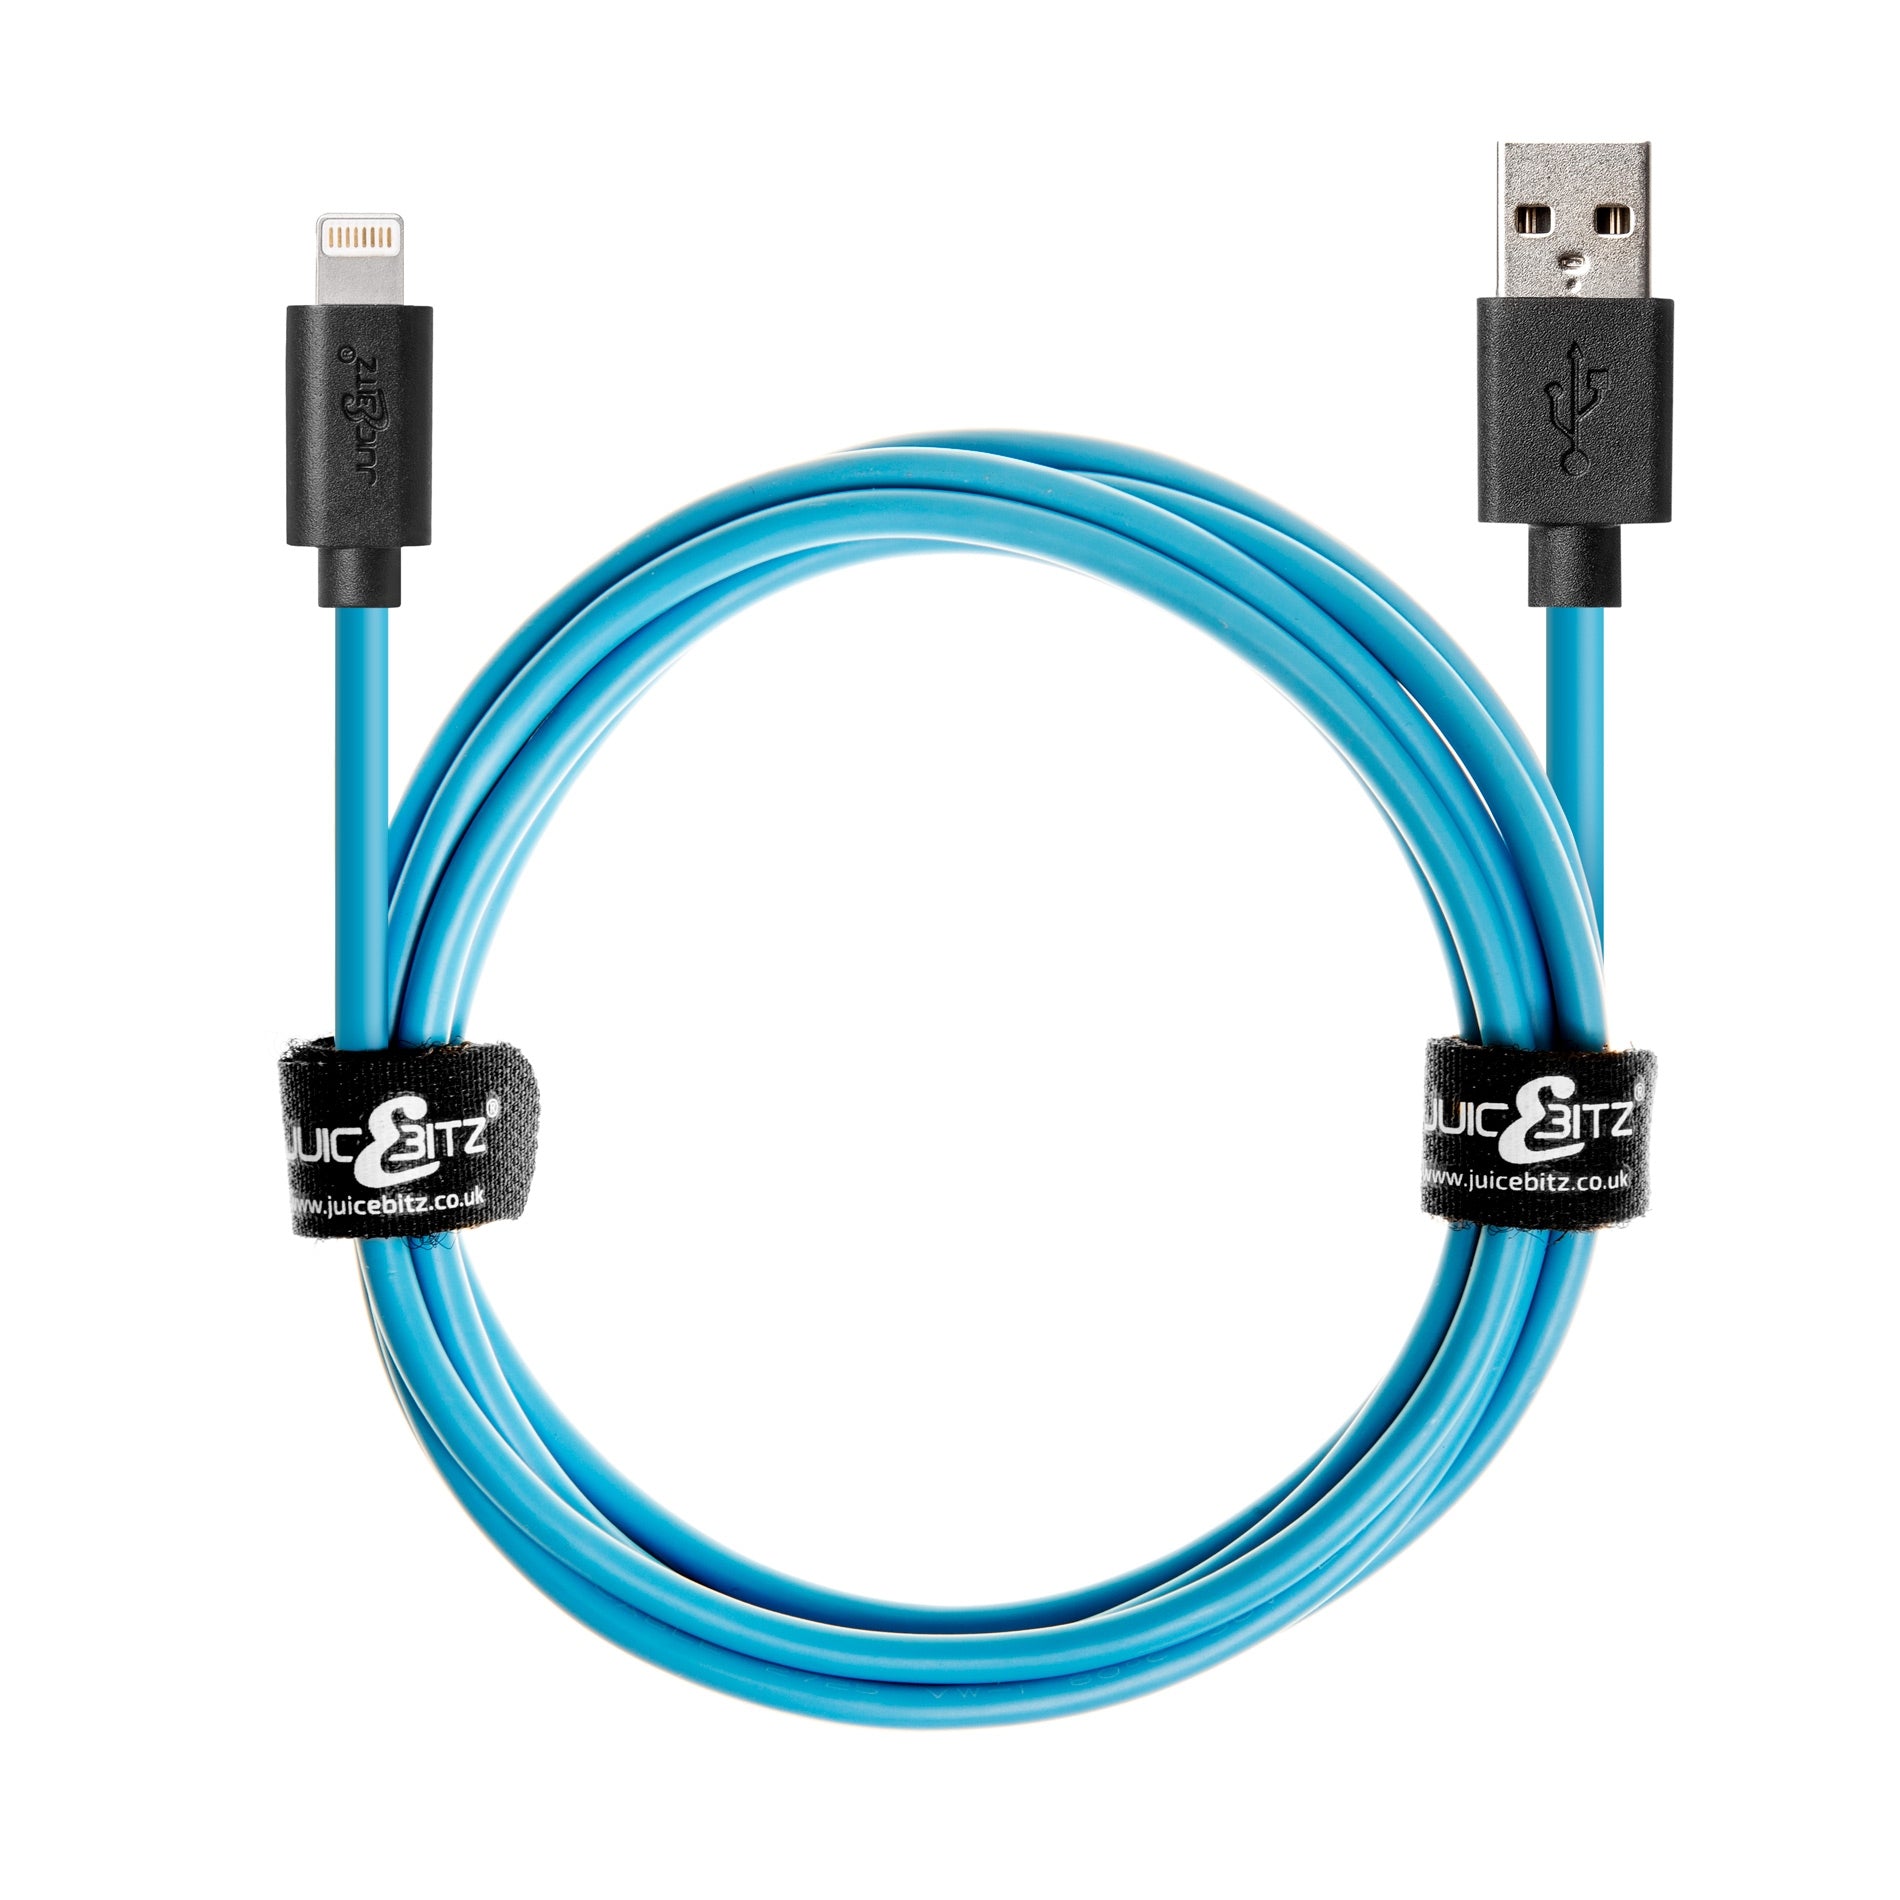 USB Charger Cable Data Sync Lead for iPhone, iPad, iPod - Blue